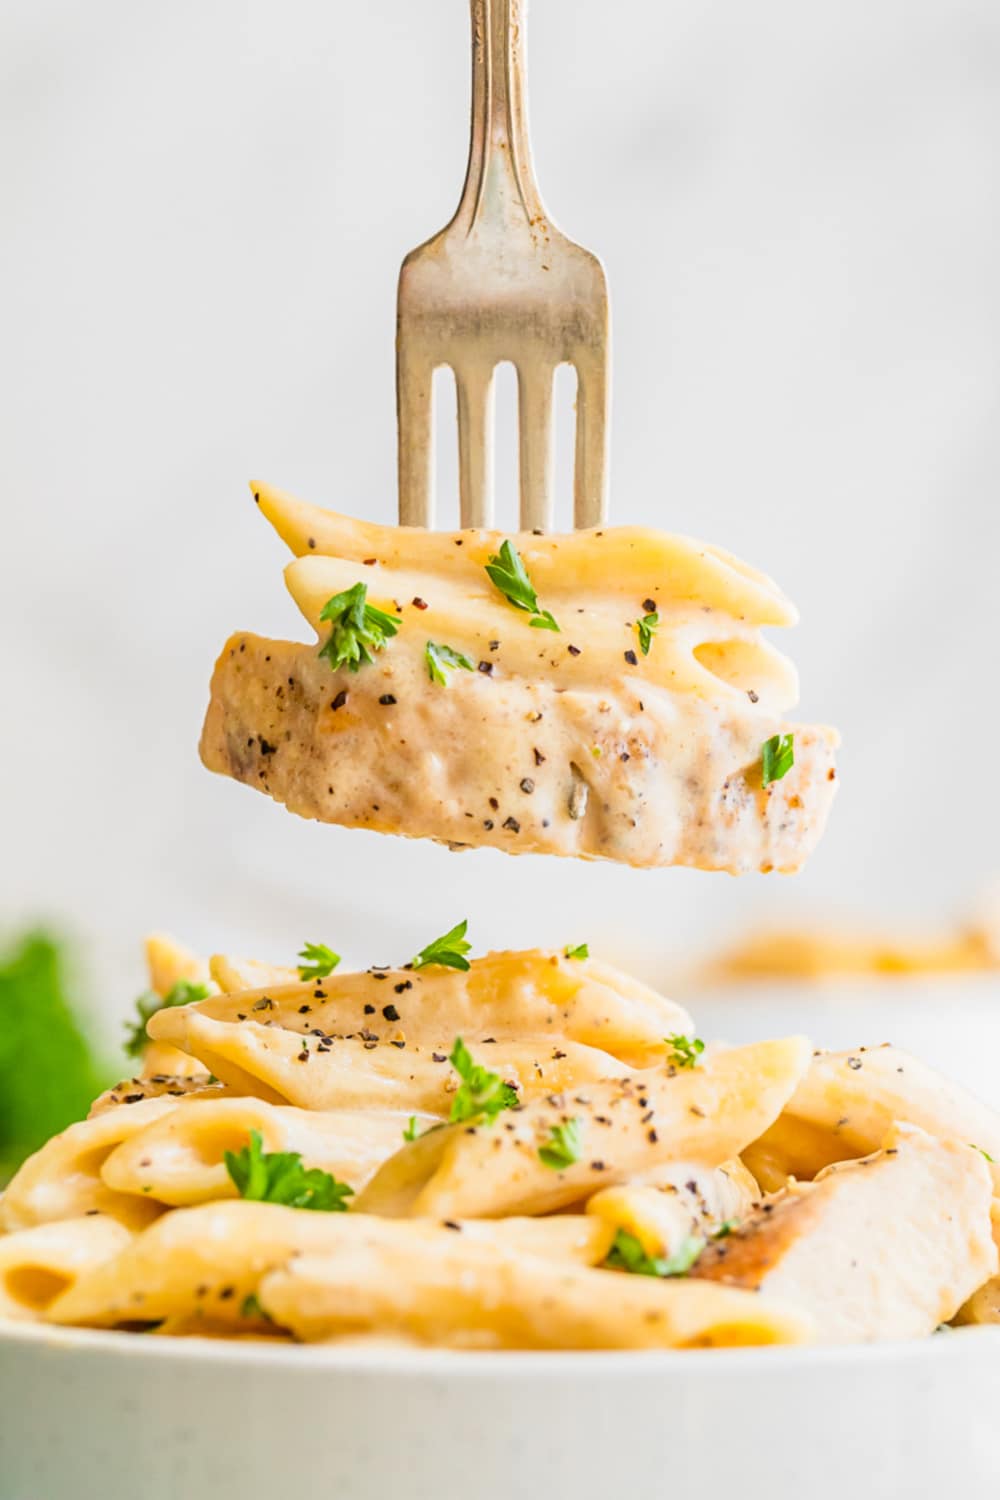 A fork with a bite of pasta and a sliced chicken on a fork.